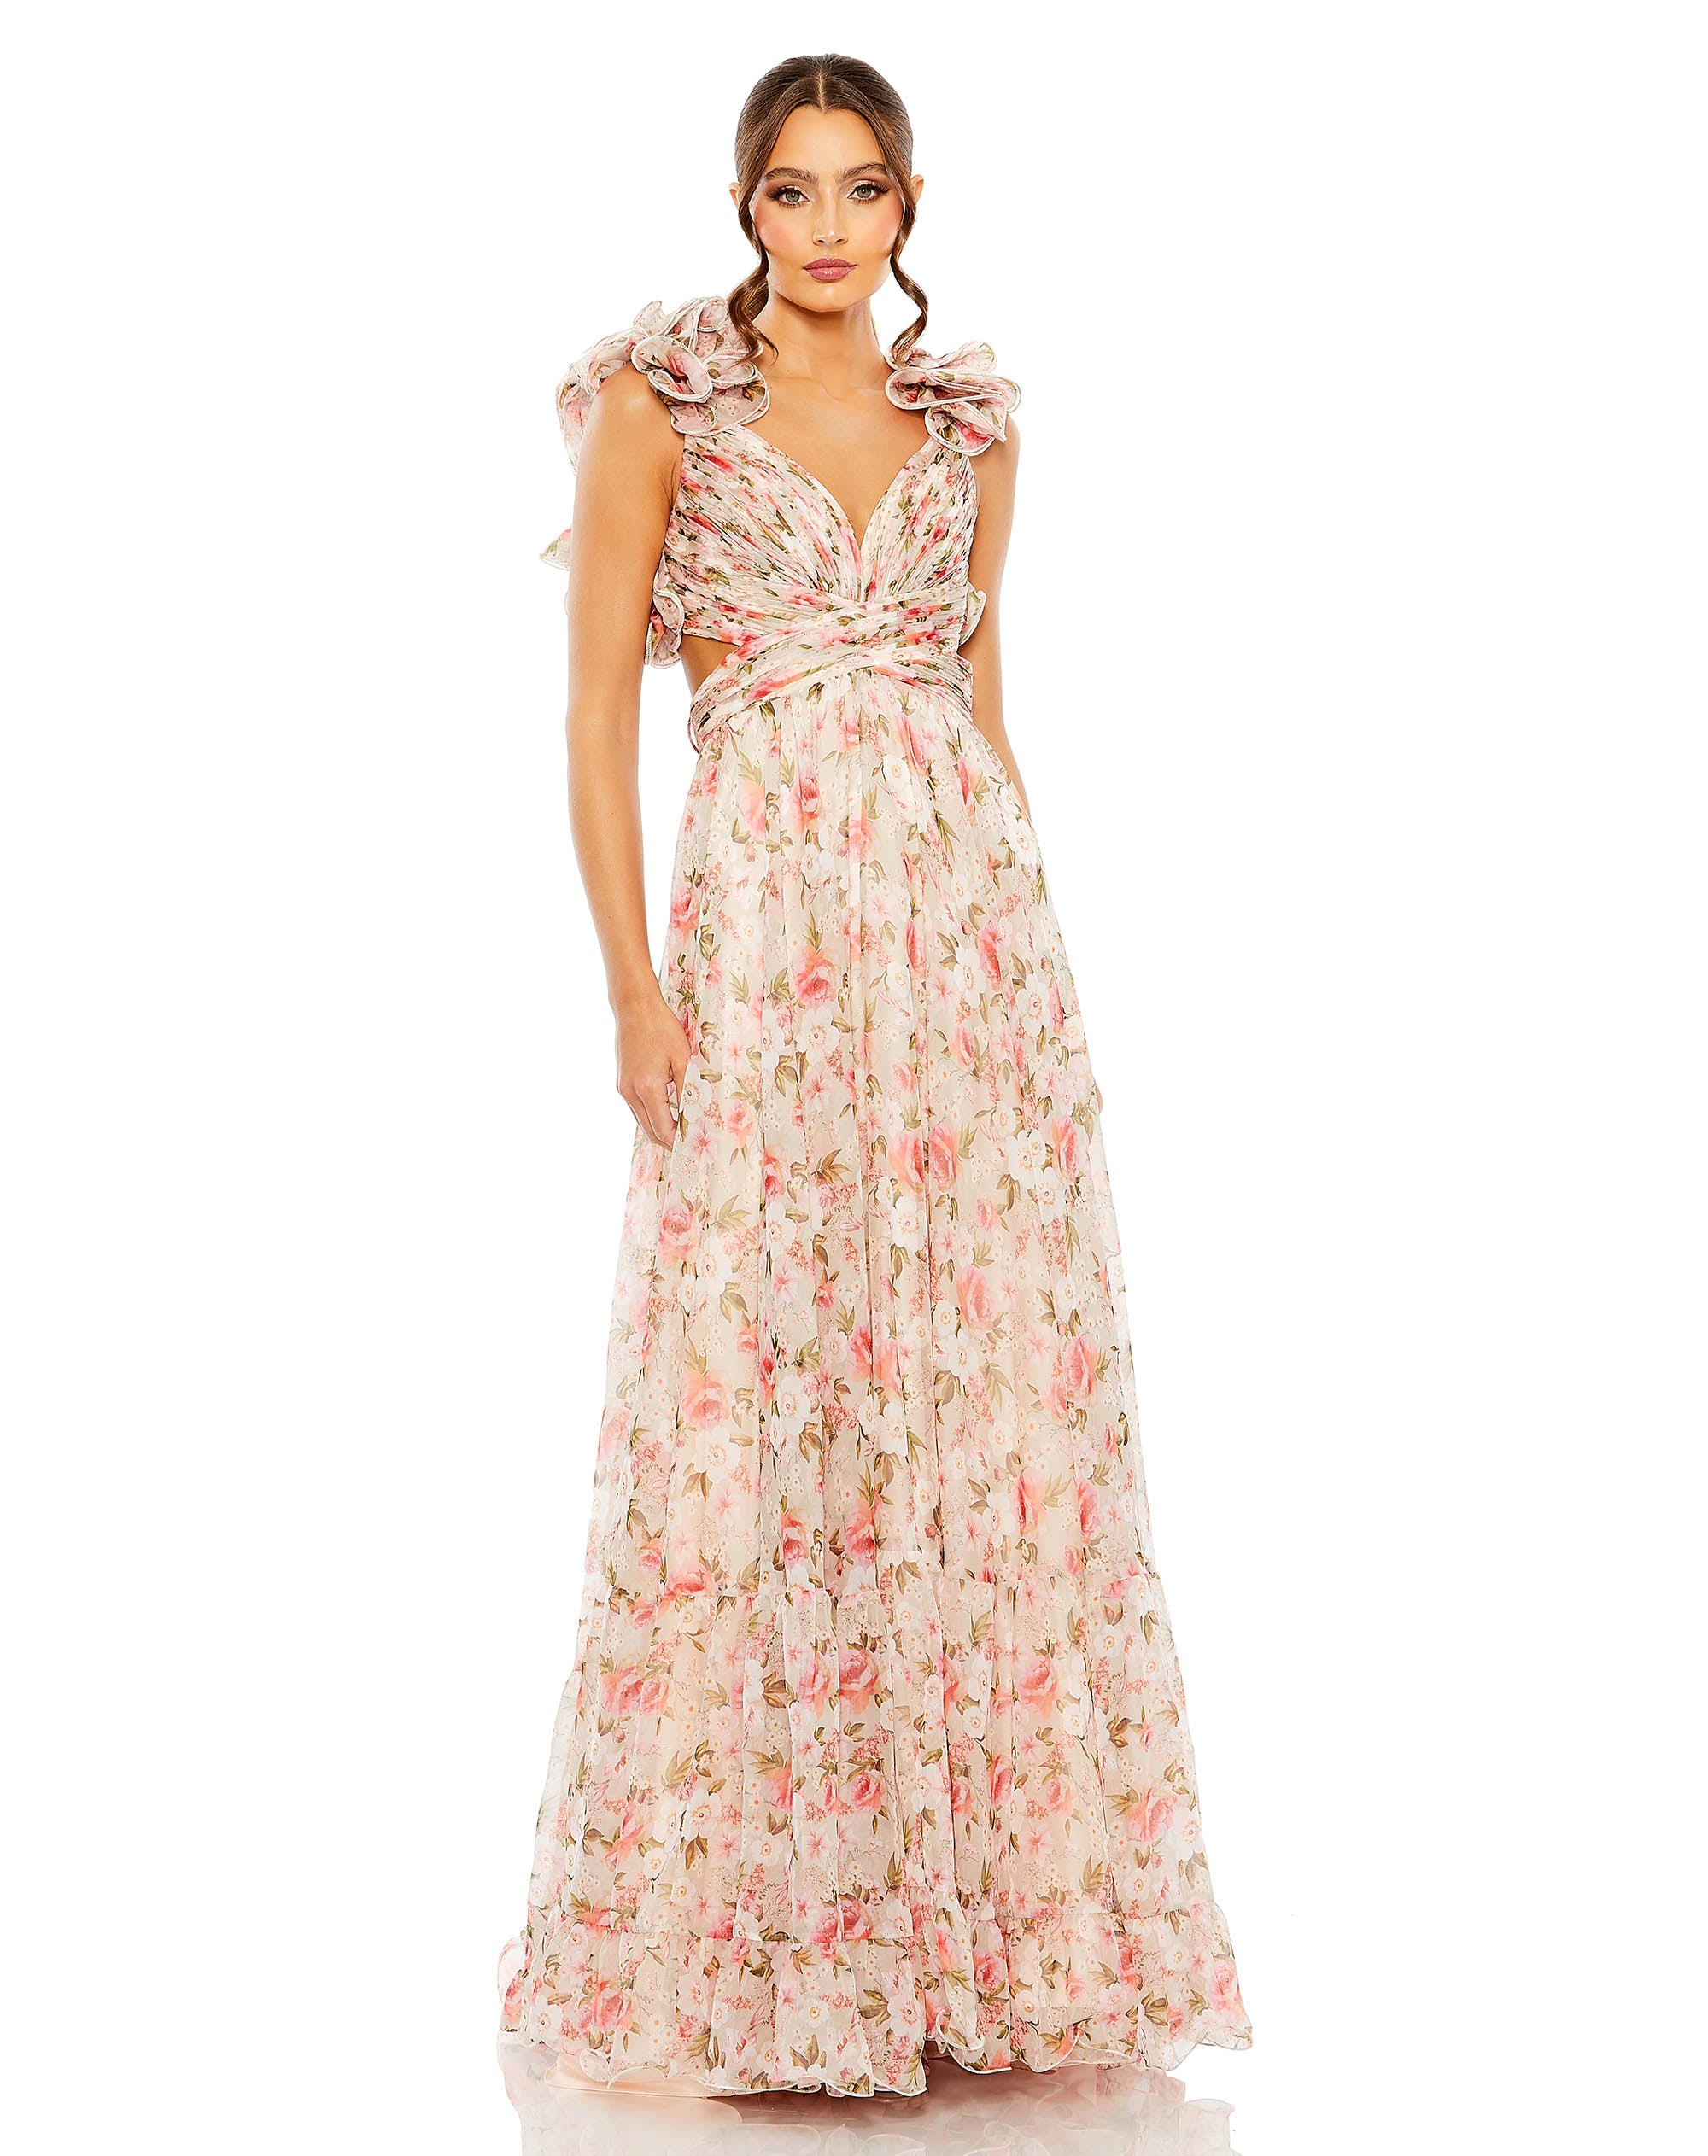 Ruffle Tiered Cut-Out Chiffon Floral Gown